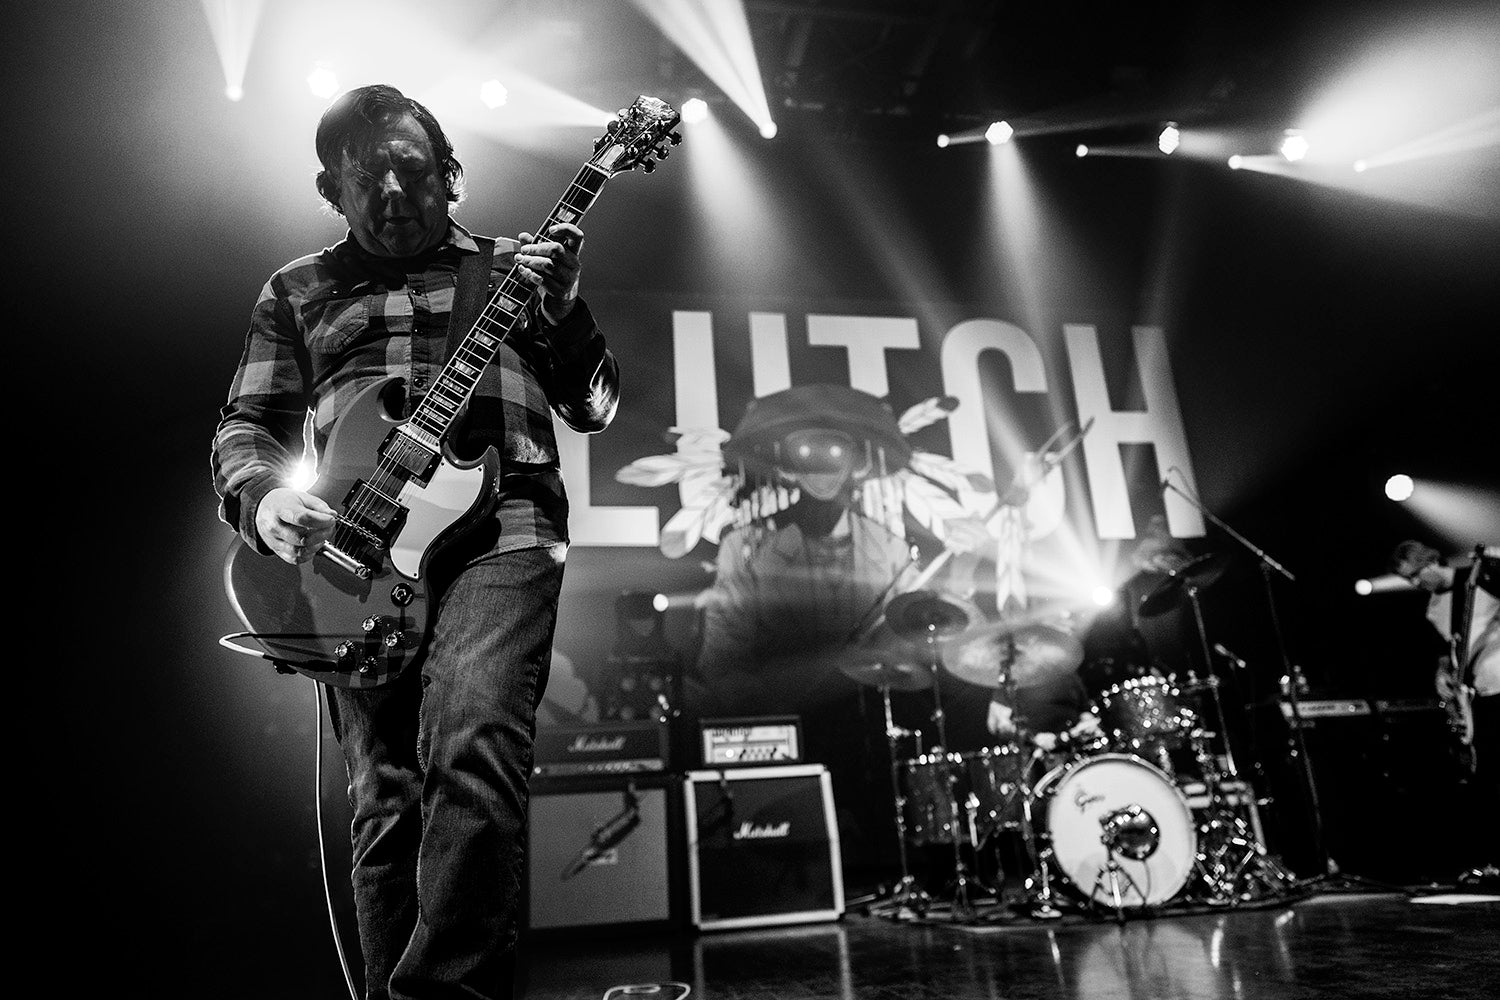 Tim Sult from Clutch